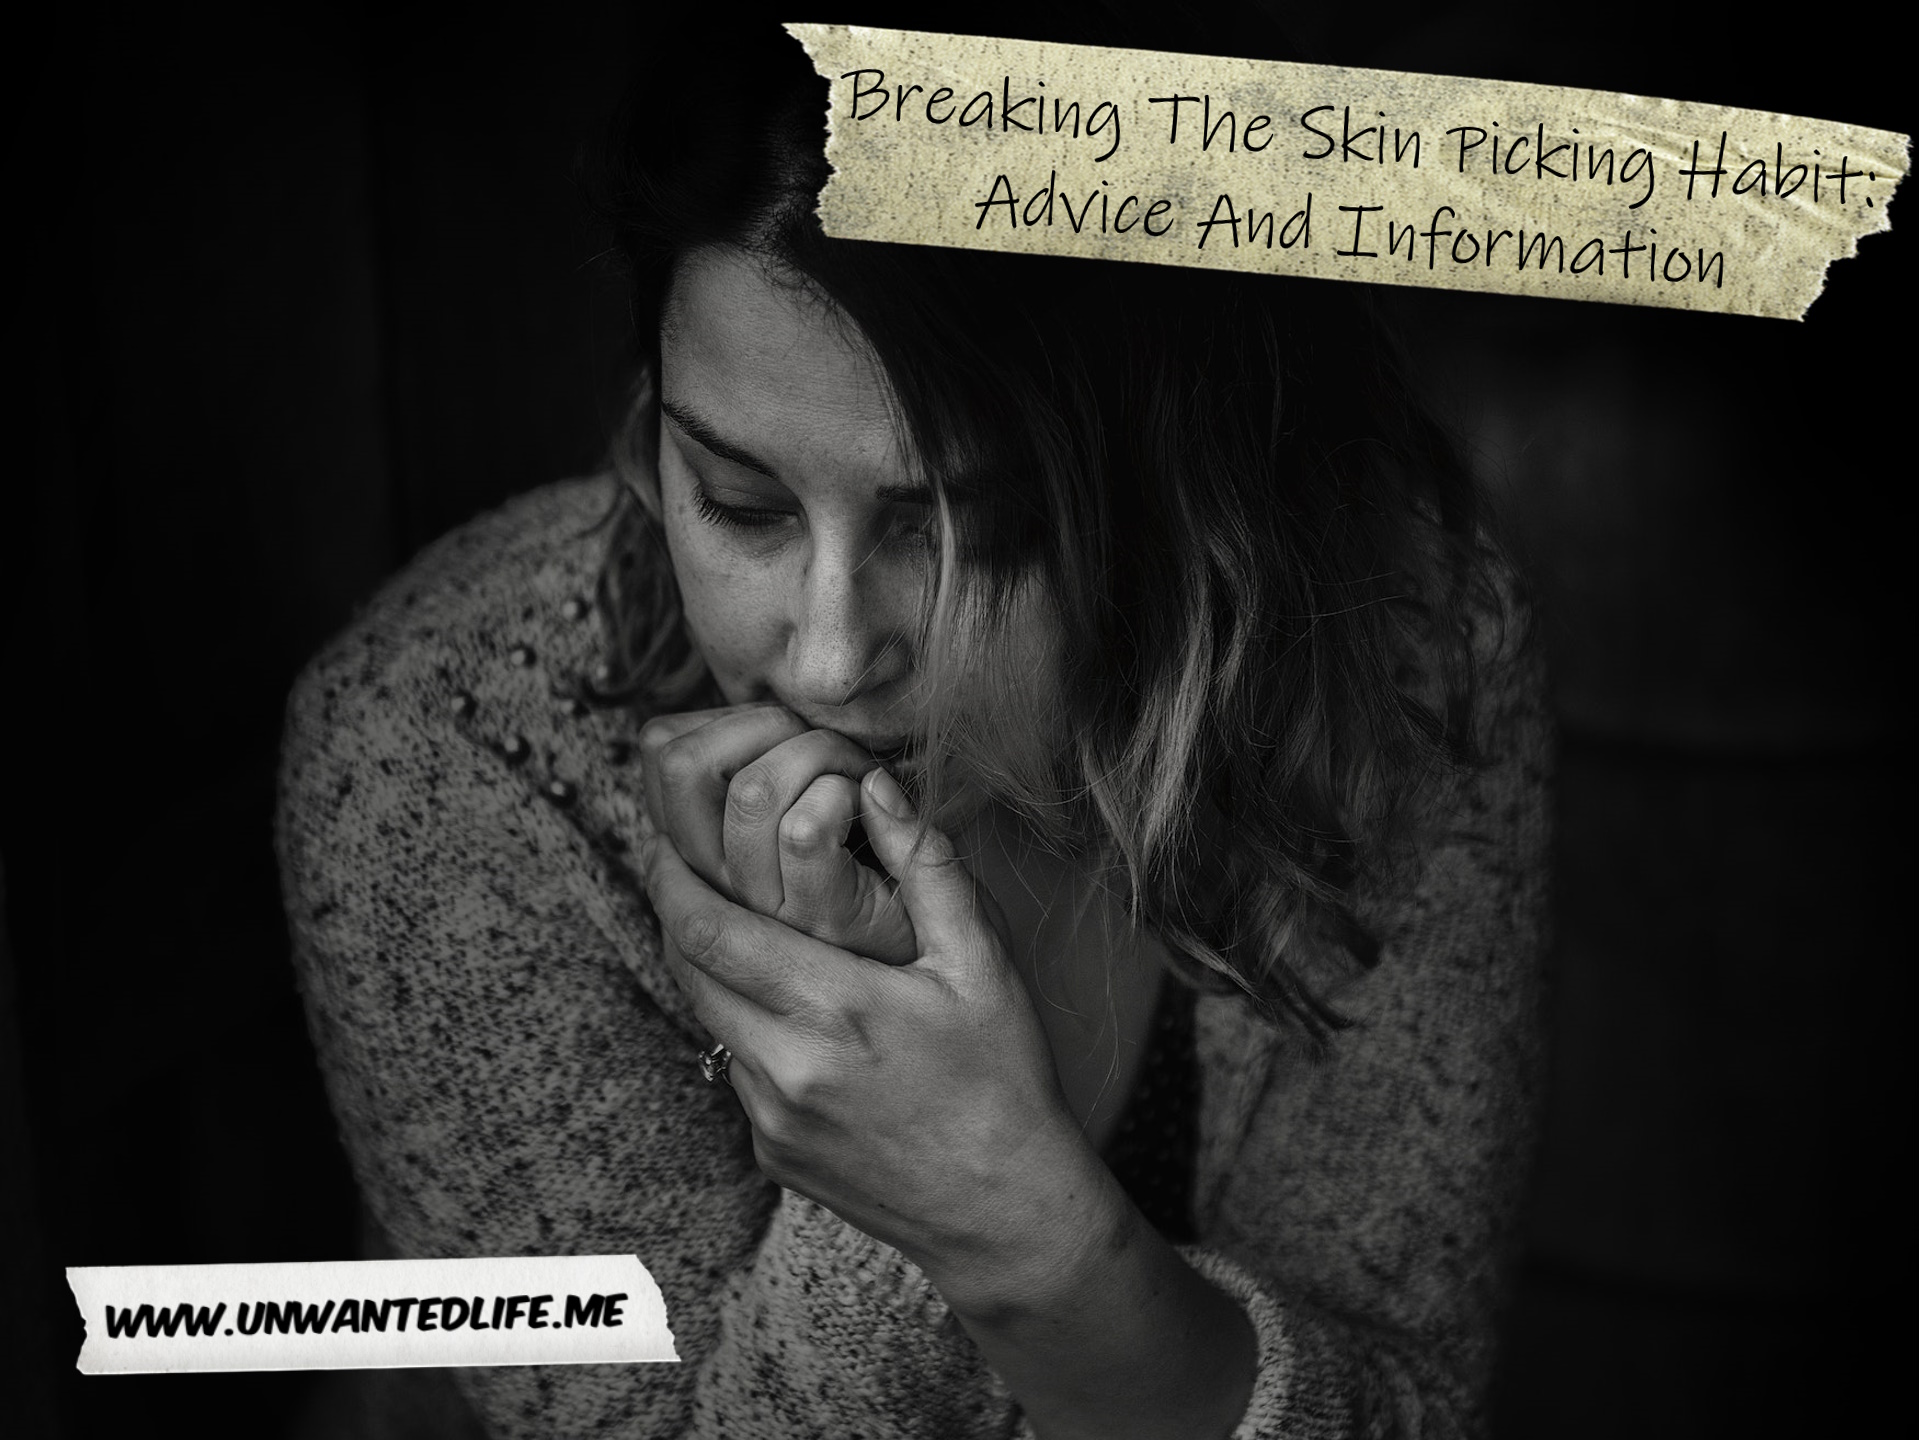 A black-and-white photo of a White woman stressed and biting her fingernails and surrounding skin to represent the topic of the article - Breaking The Skin Picking Habit: Advice And Information